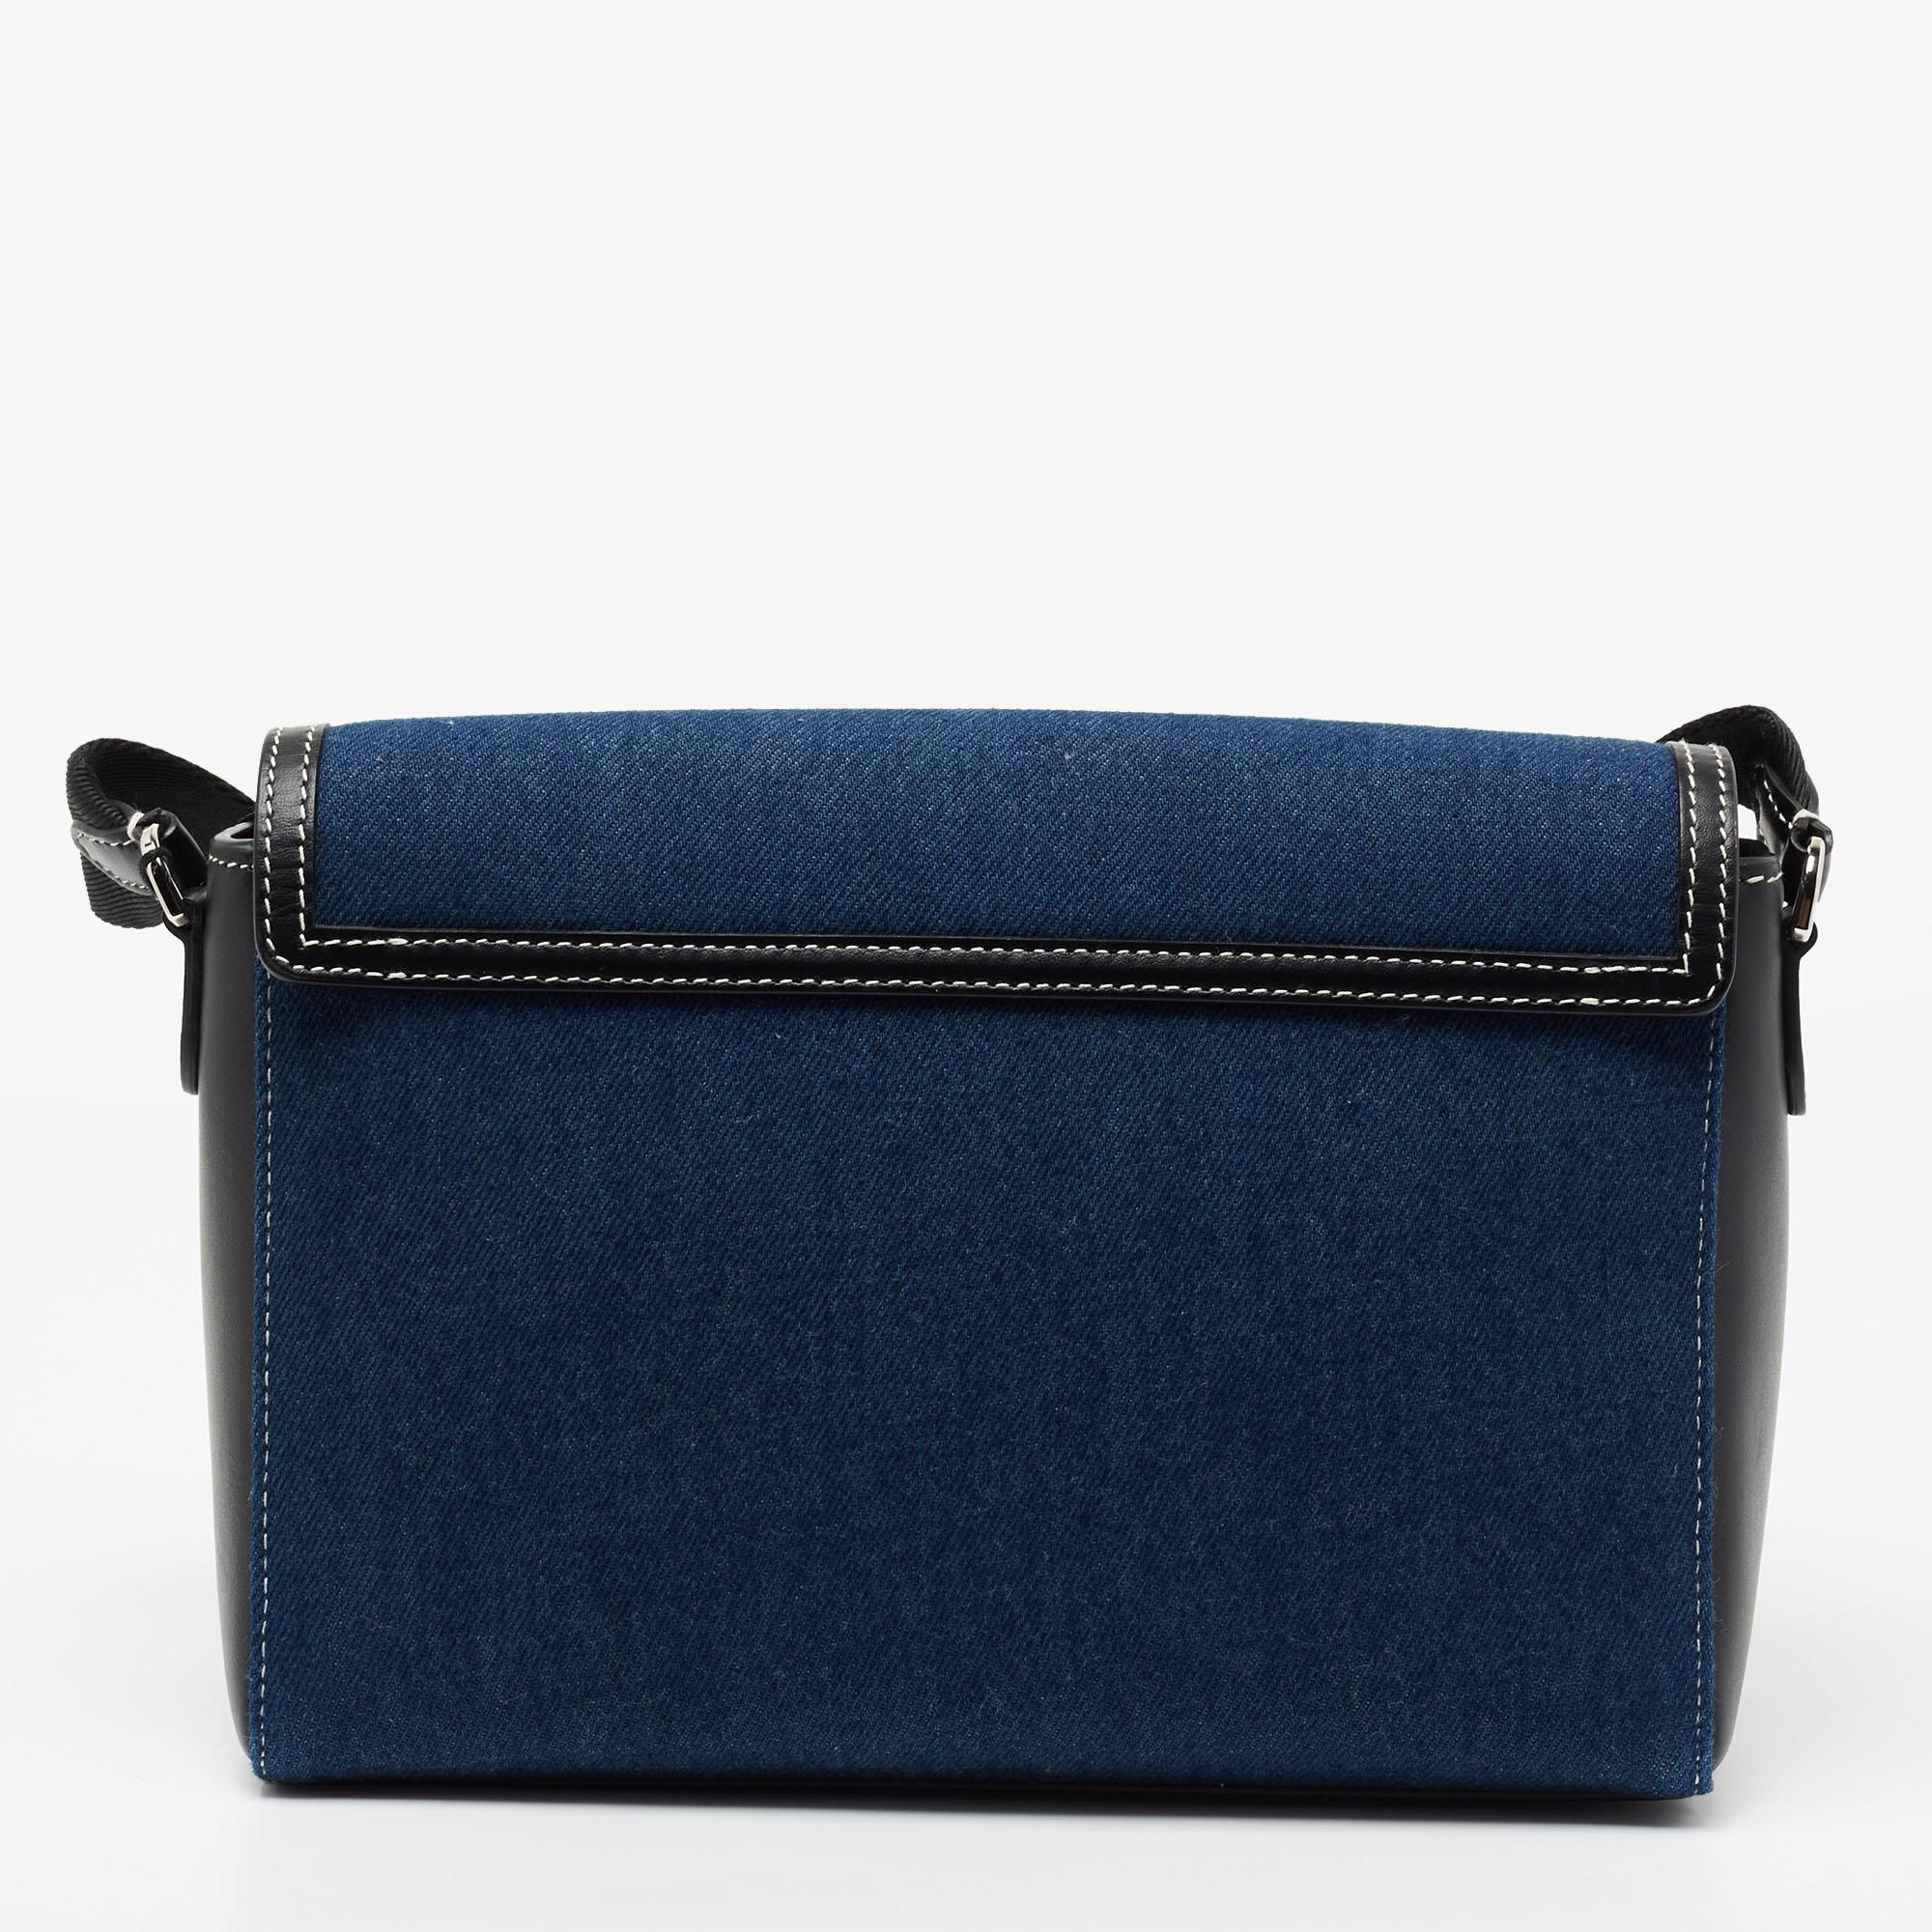 Basic essentials can be carried effortlessly in this blue-black crossbody bag from Burberry. Crafted from denim and leather, it features a graphic logo print on the front and a flap that opens into a well-sized interior.

Includes: Brand Tag